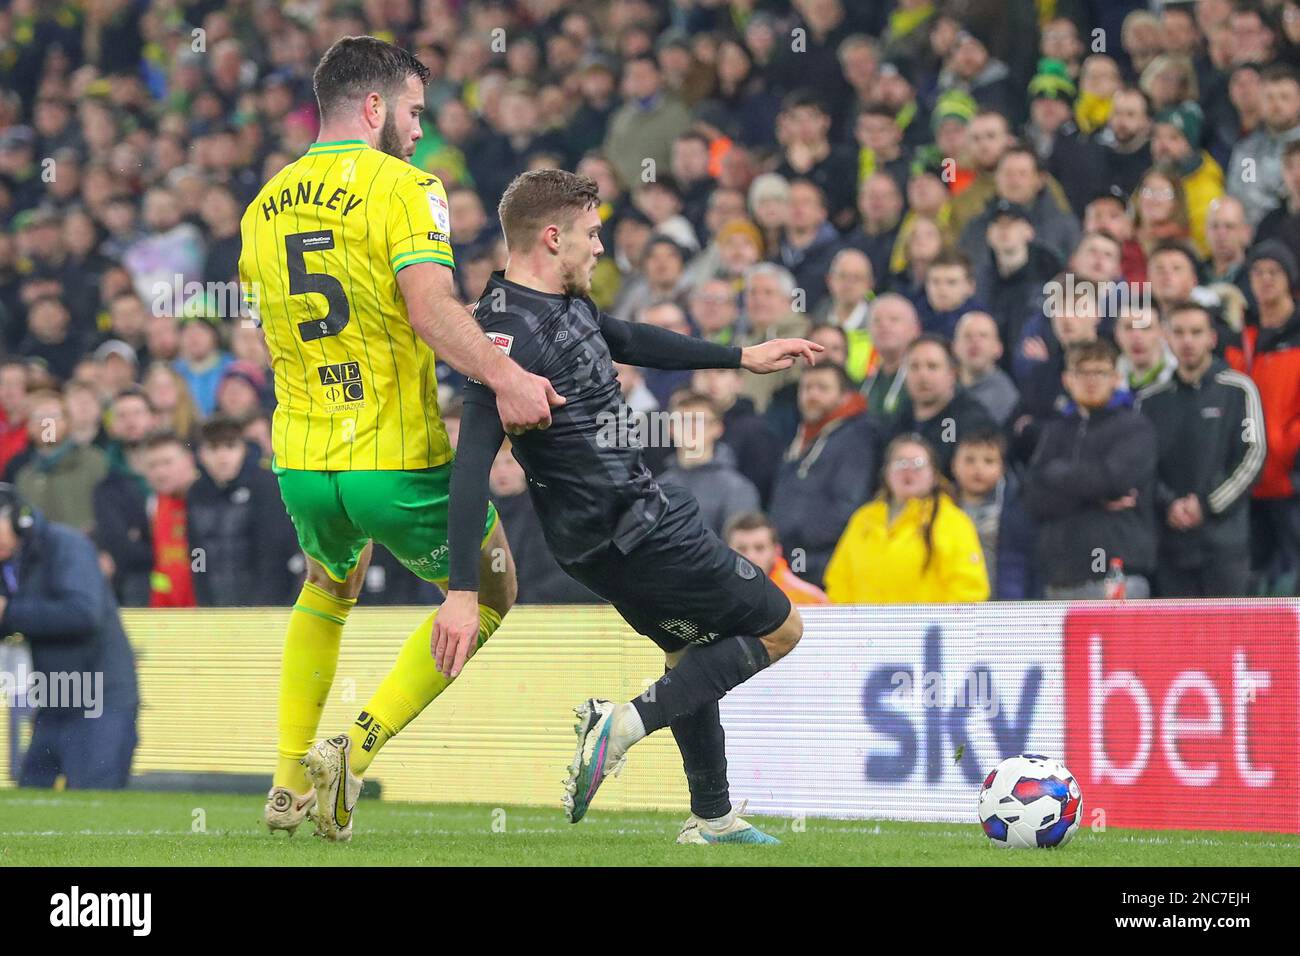 Grant Hanley #5 of Noriwch City tackles Regan Slater #27 of Hull City during the Sky Bet Championship match Norwich City vs Hull City at Carrow Road, Norwich, United Kingdom, 14th February 2023  (Photo by Gareth Evans/News Images) Stock Photo